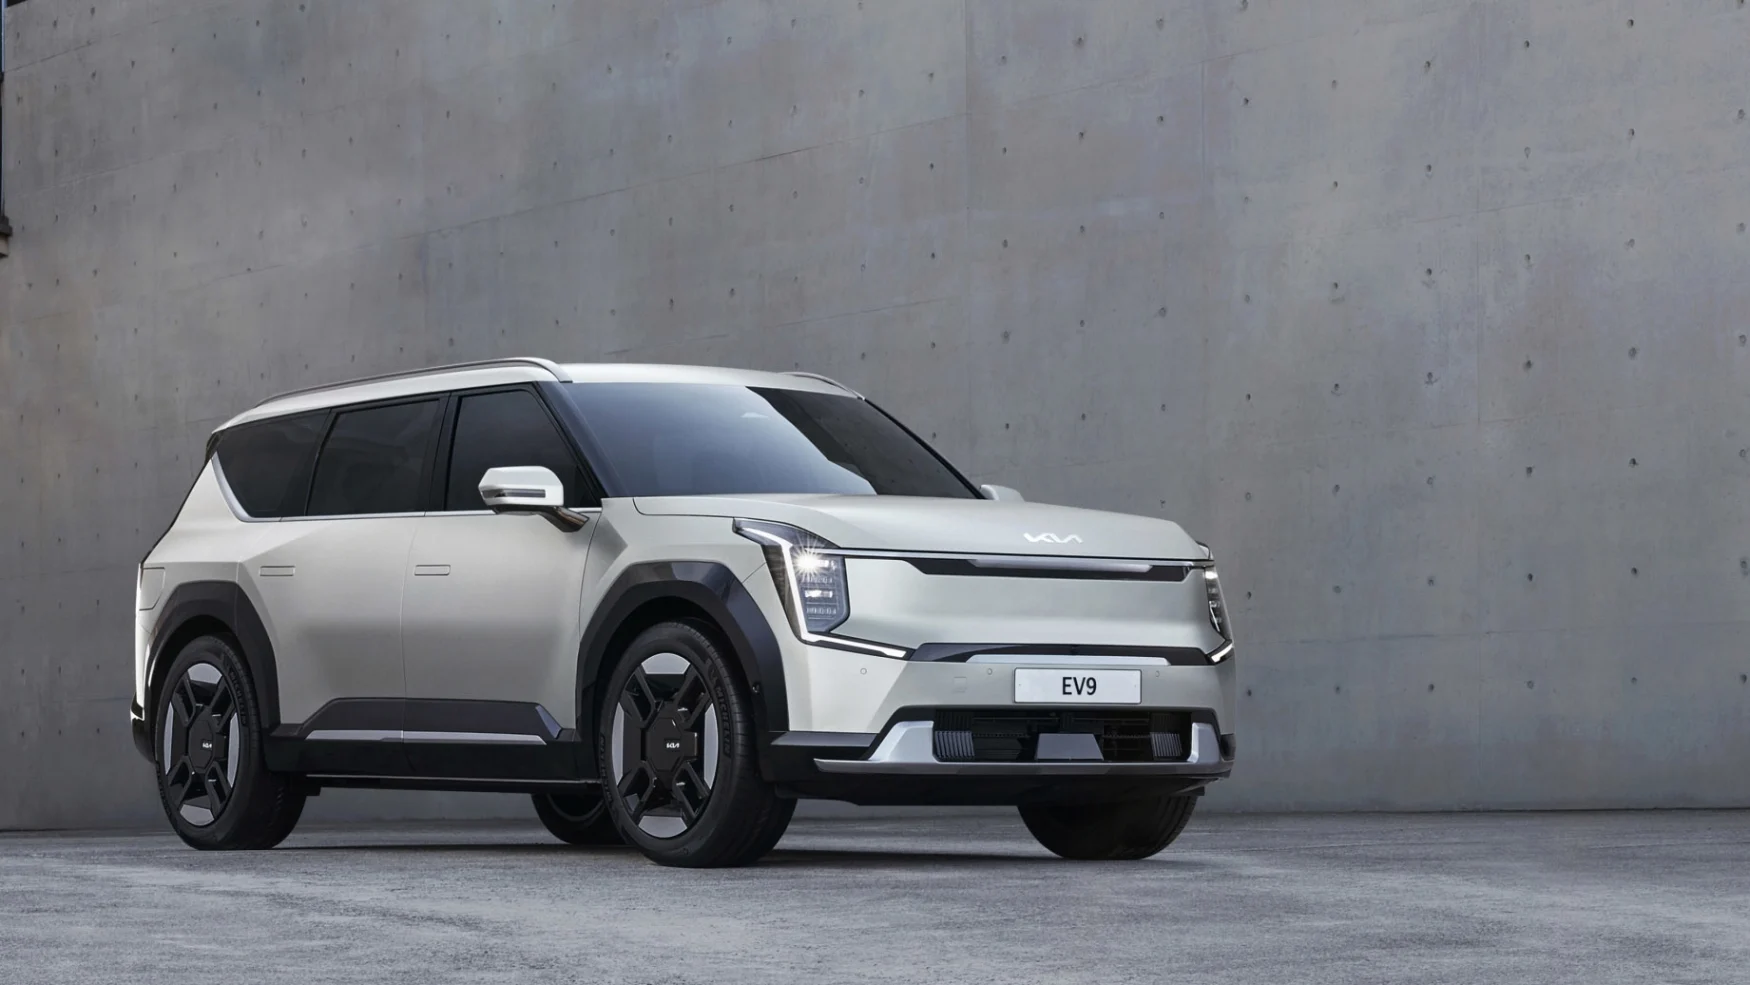 Kia unveils the EV9 electric SUV with three rows of seats